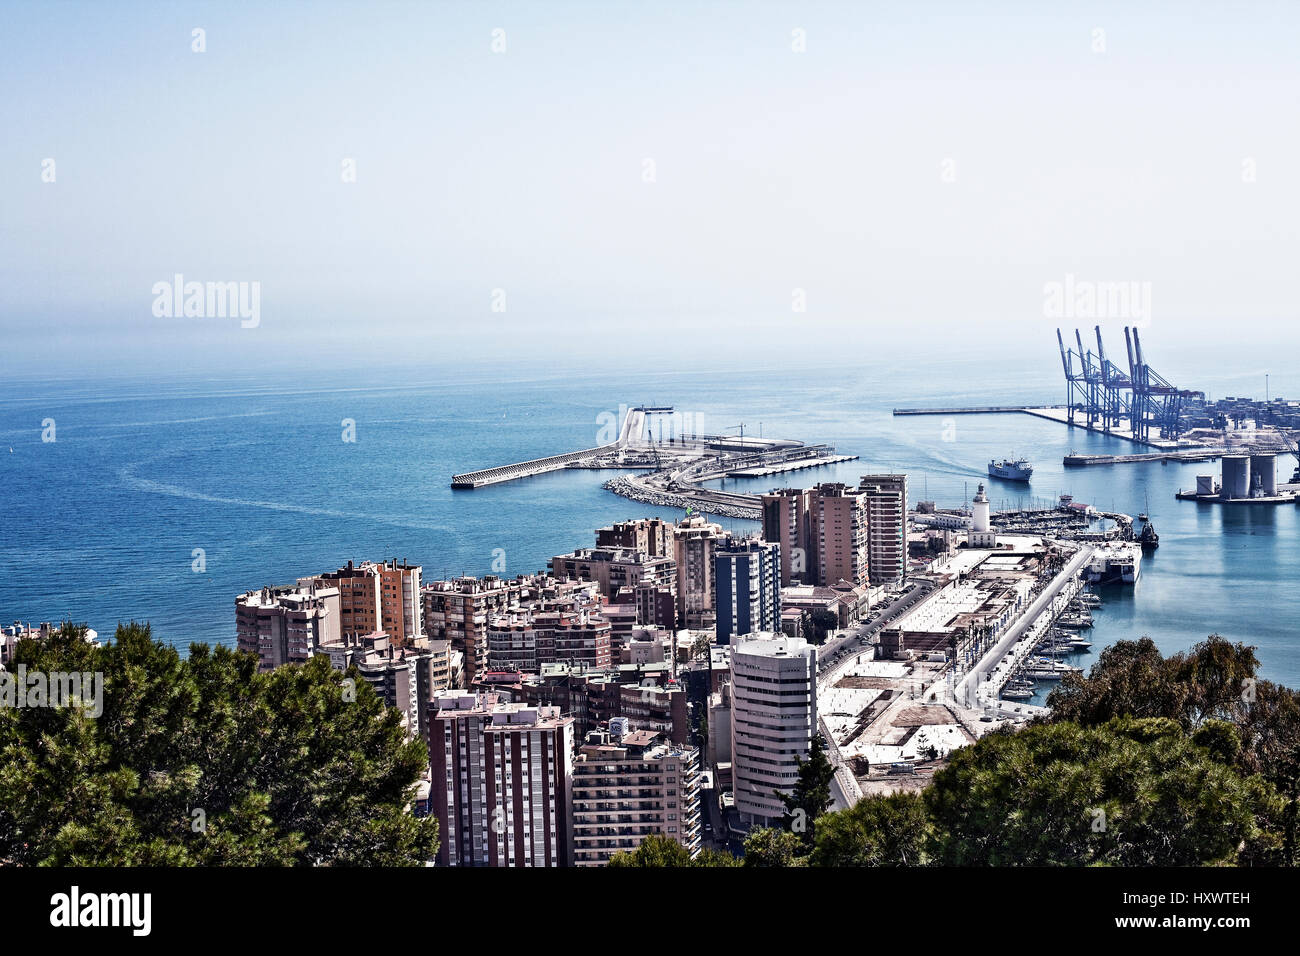 The port of Malaga is an international seaport in southern Spain. It is the oldest continuously-operated port in Spain and one of the oldest in the Me Stock Photo